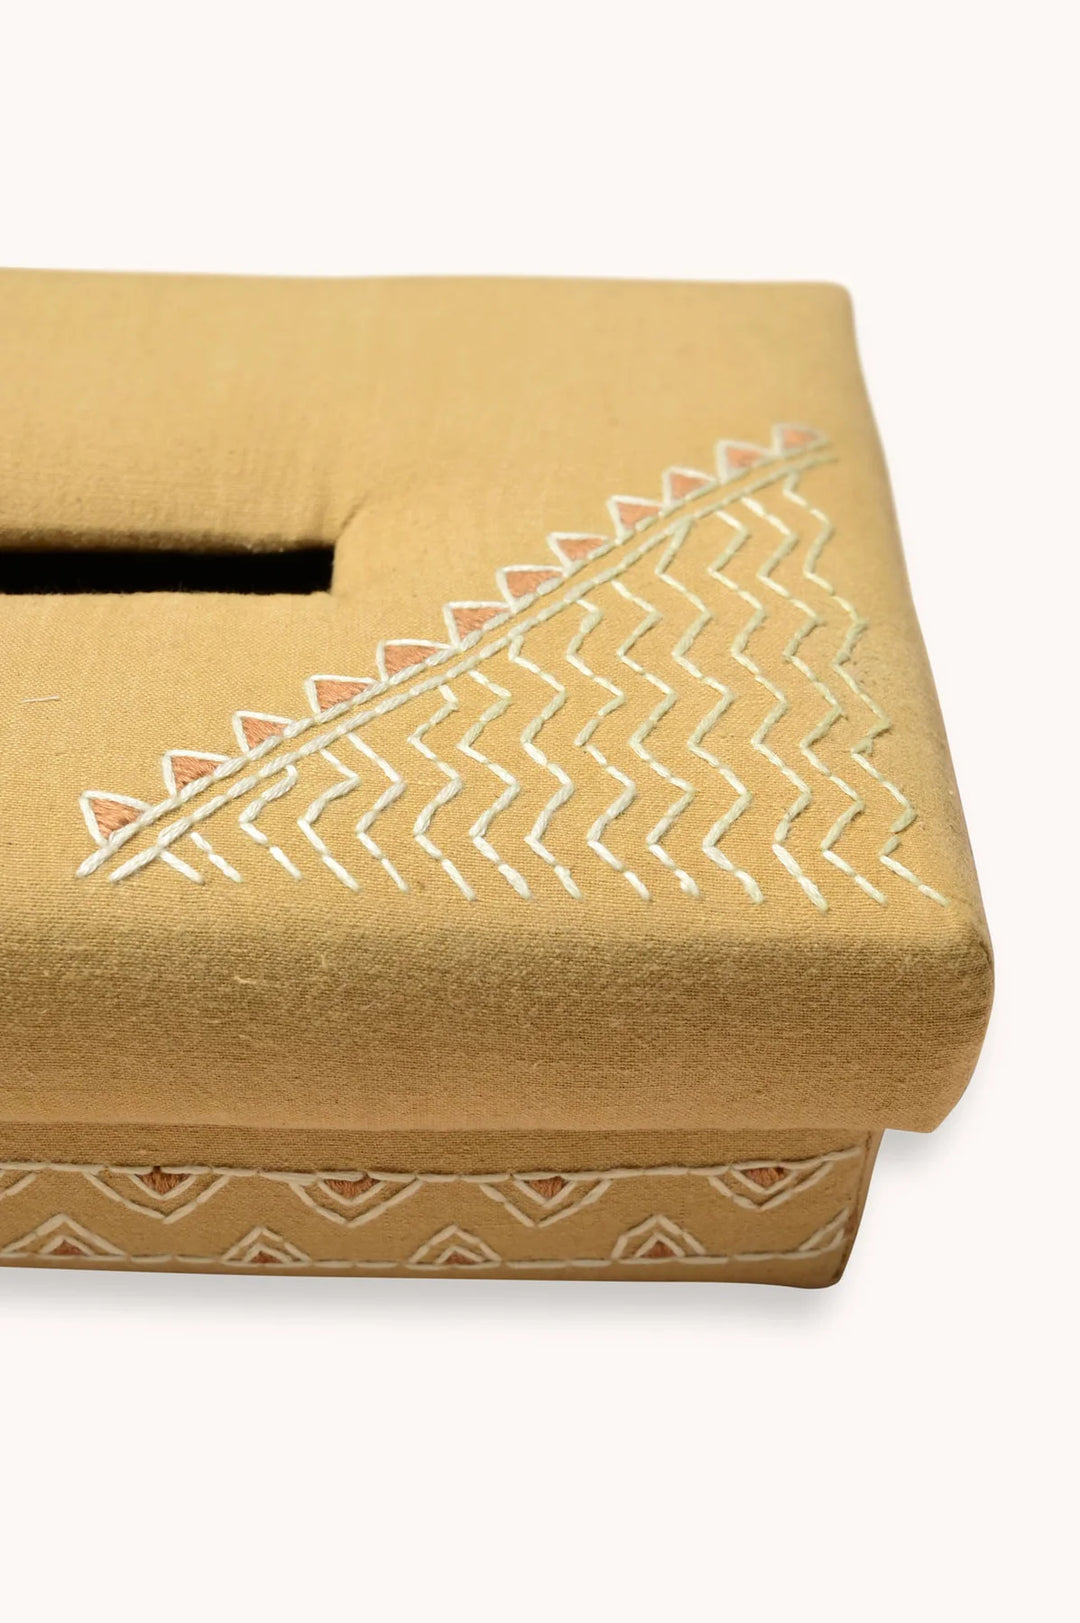 Yellow Tissue Box with Aztec Embroidery | Zea Handwoven Tissue Box - Yellow